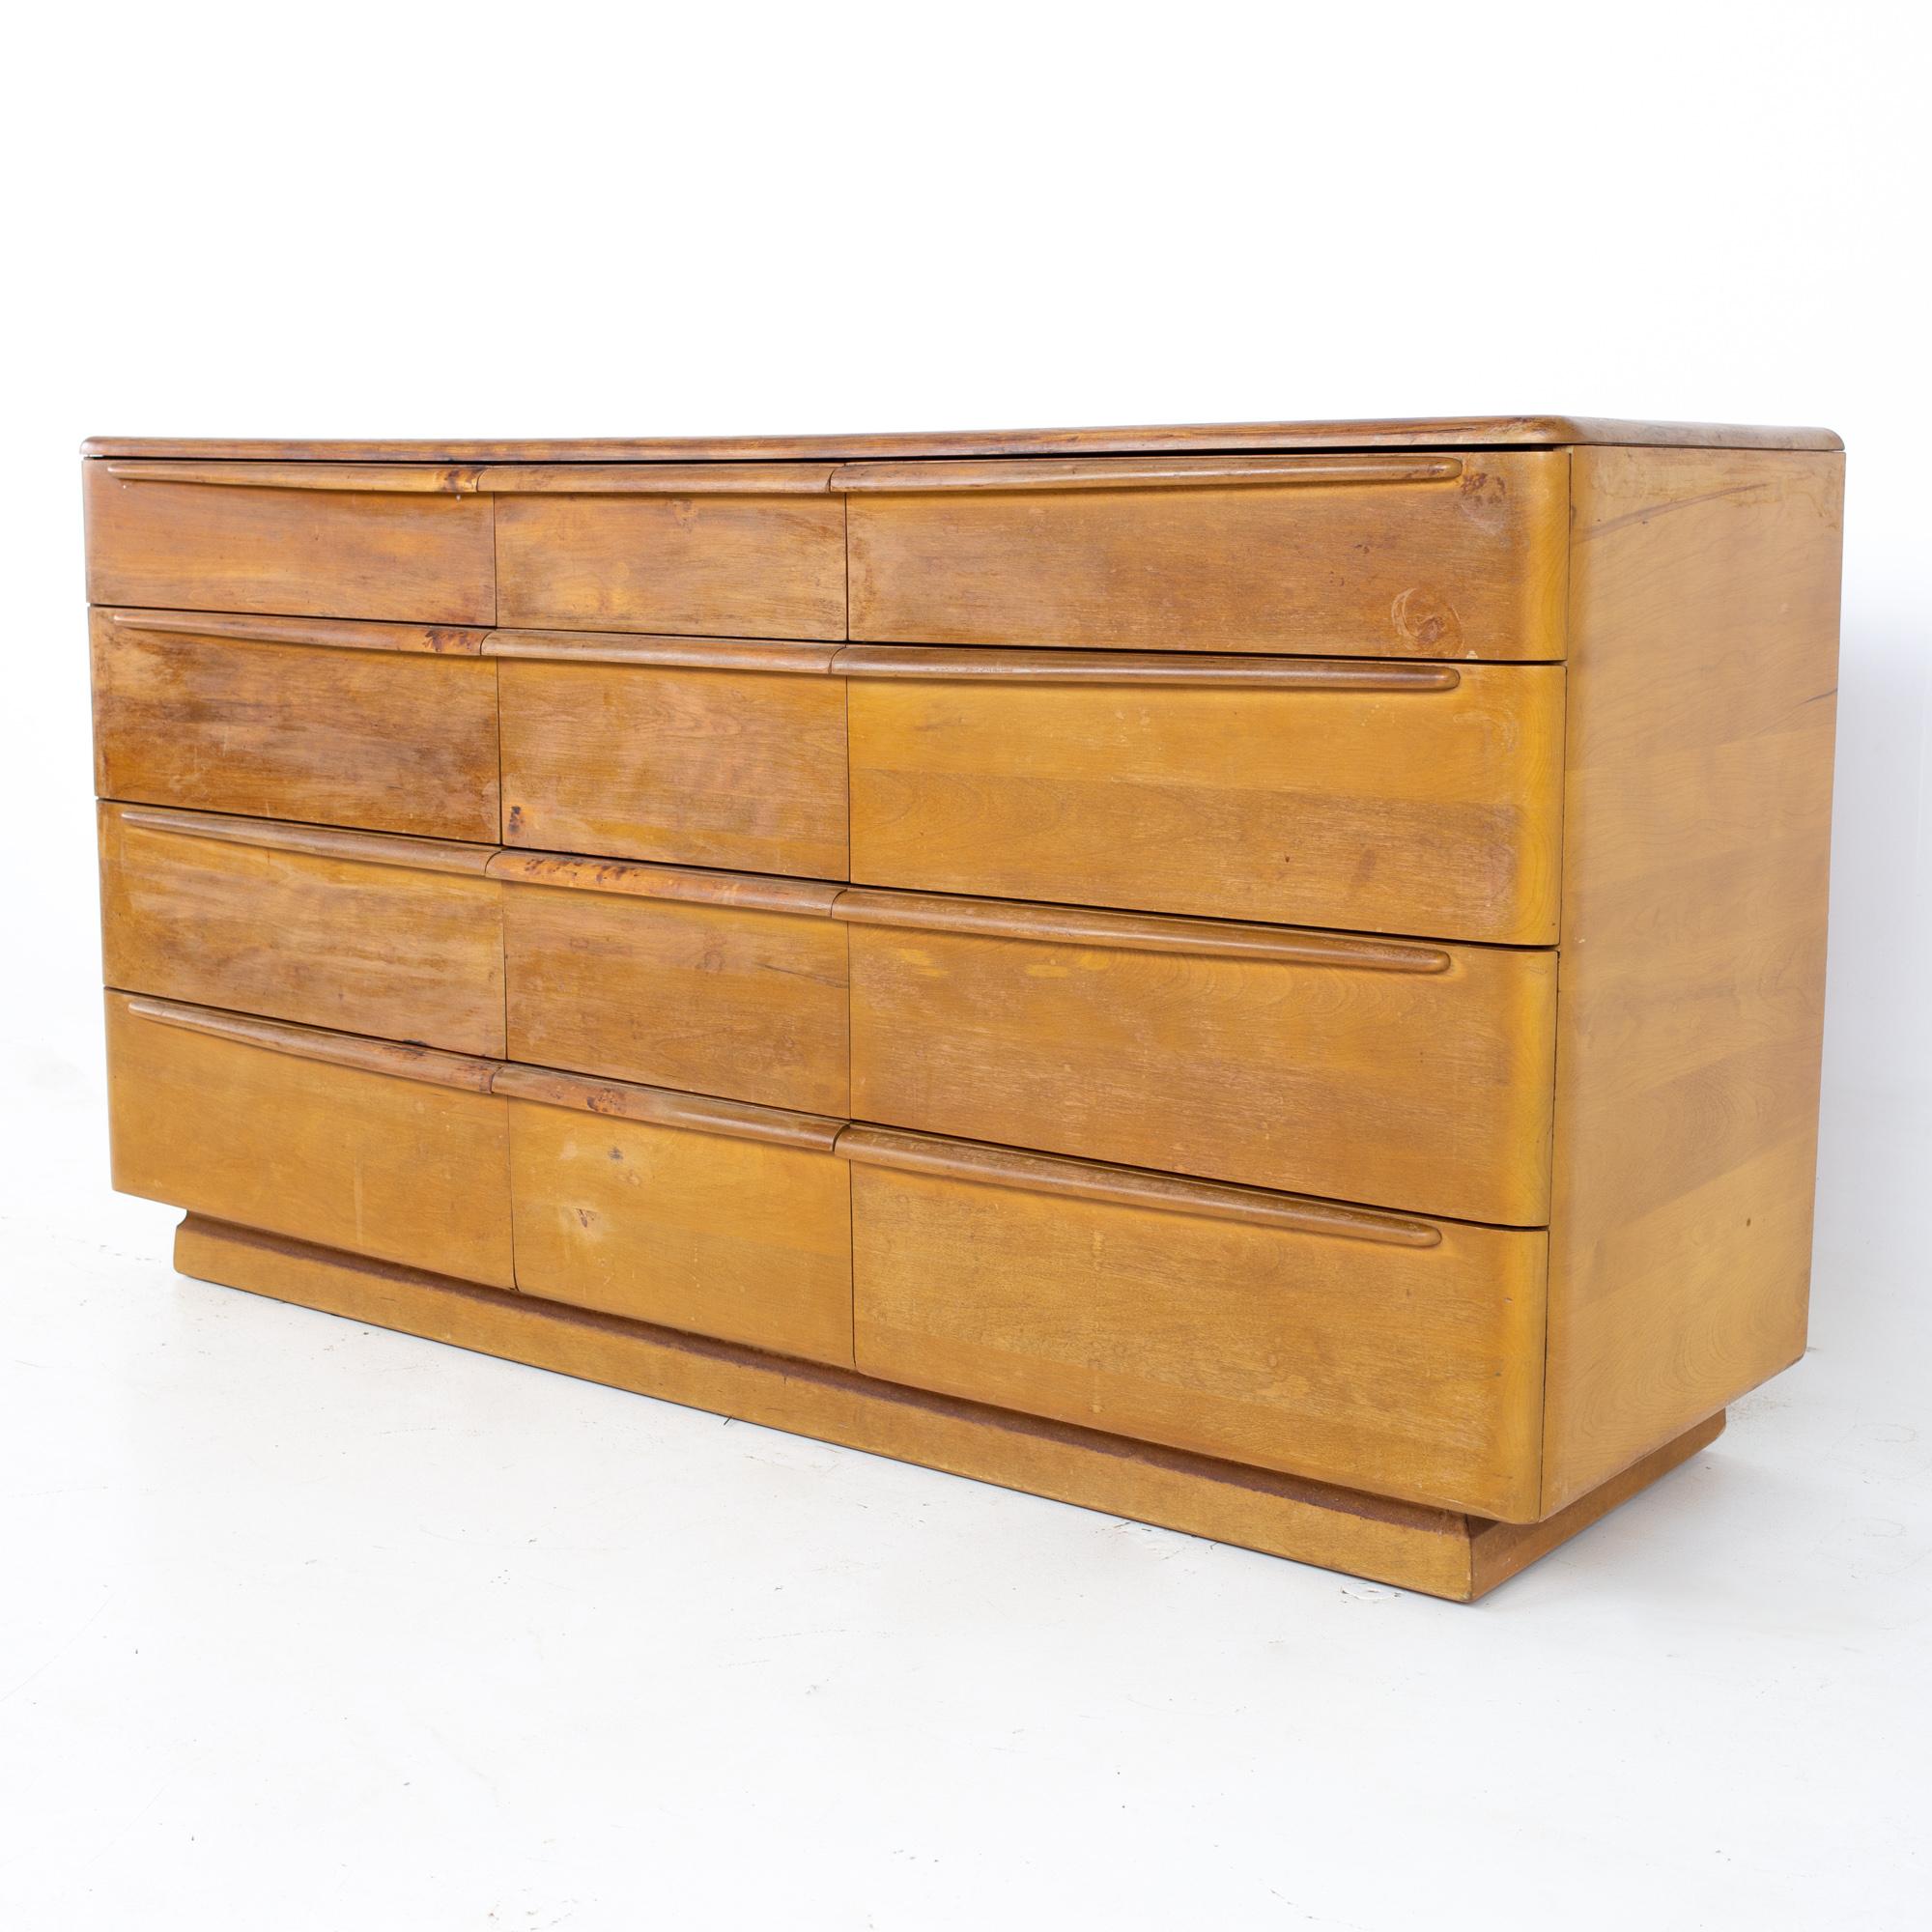 Heywood Wakefield Mid Century solid wood 12 drawer lowboy dresser
Dresser measures: 62 wide x 20 deep x 32.75 inches high

All pieces of furniture can be had in what we call restored vintage condition. That means the piece is restored upon